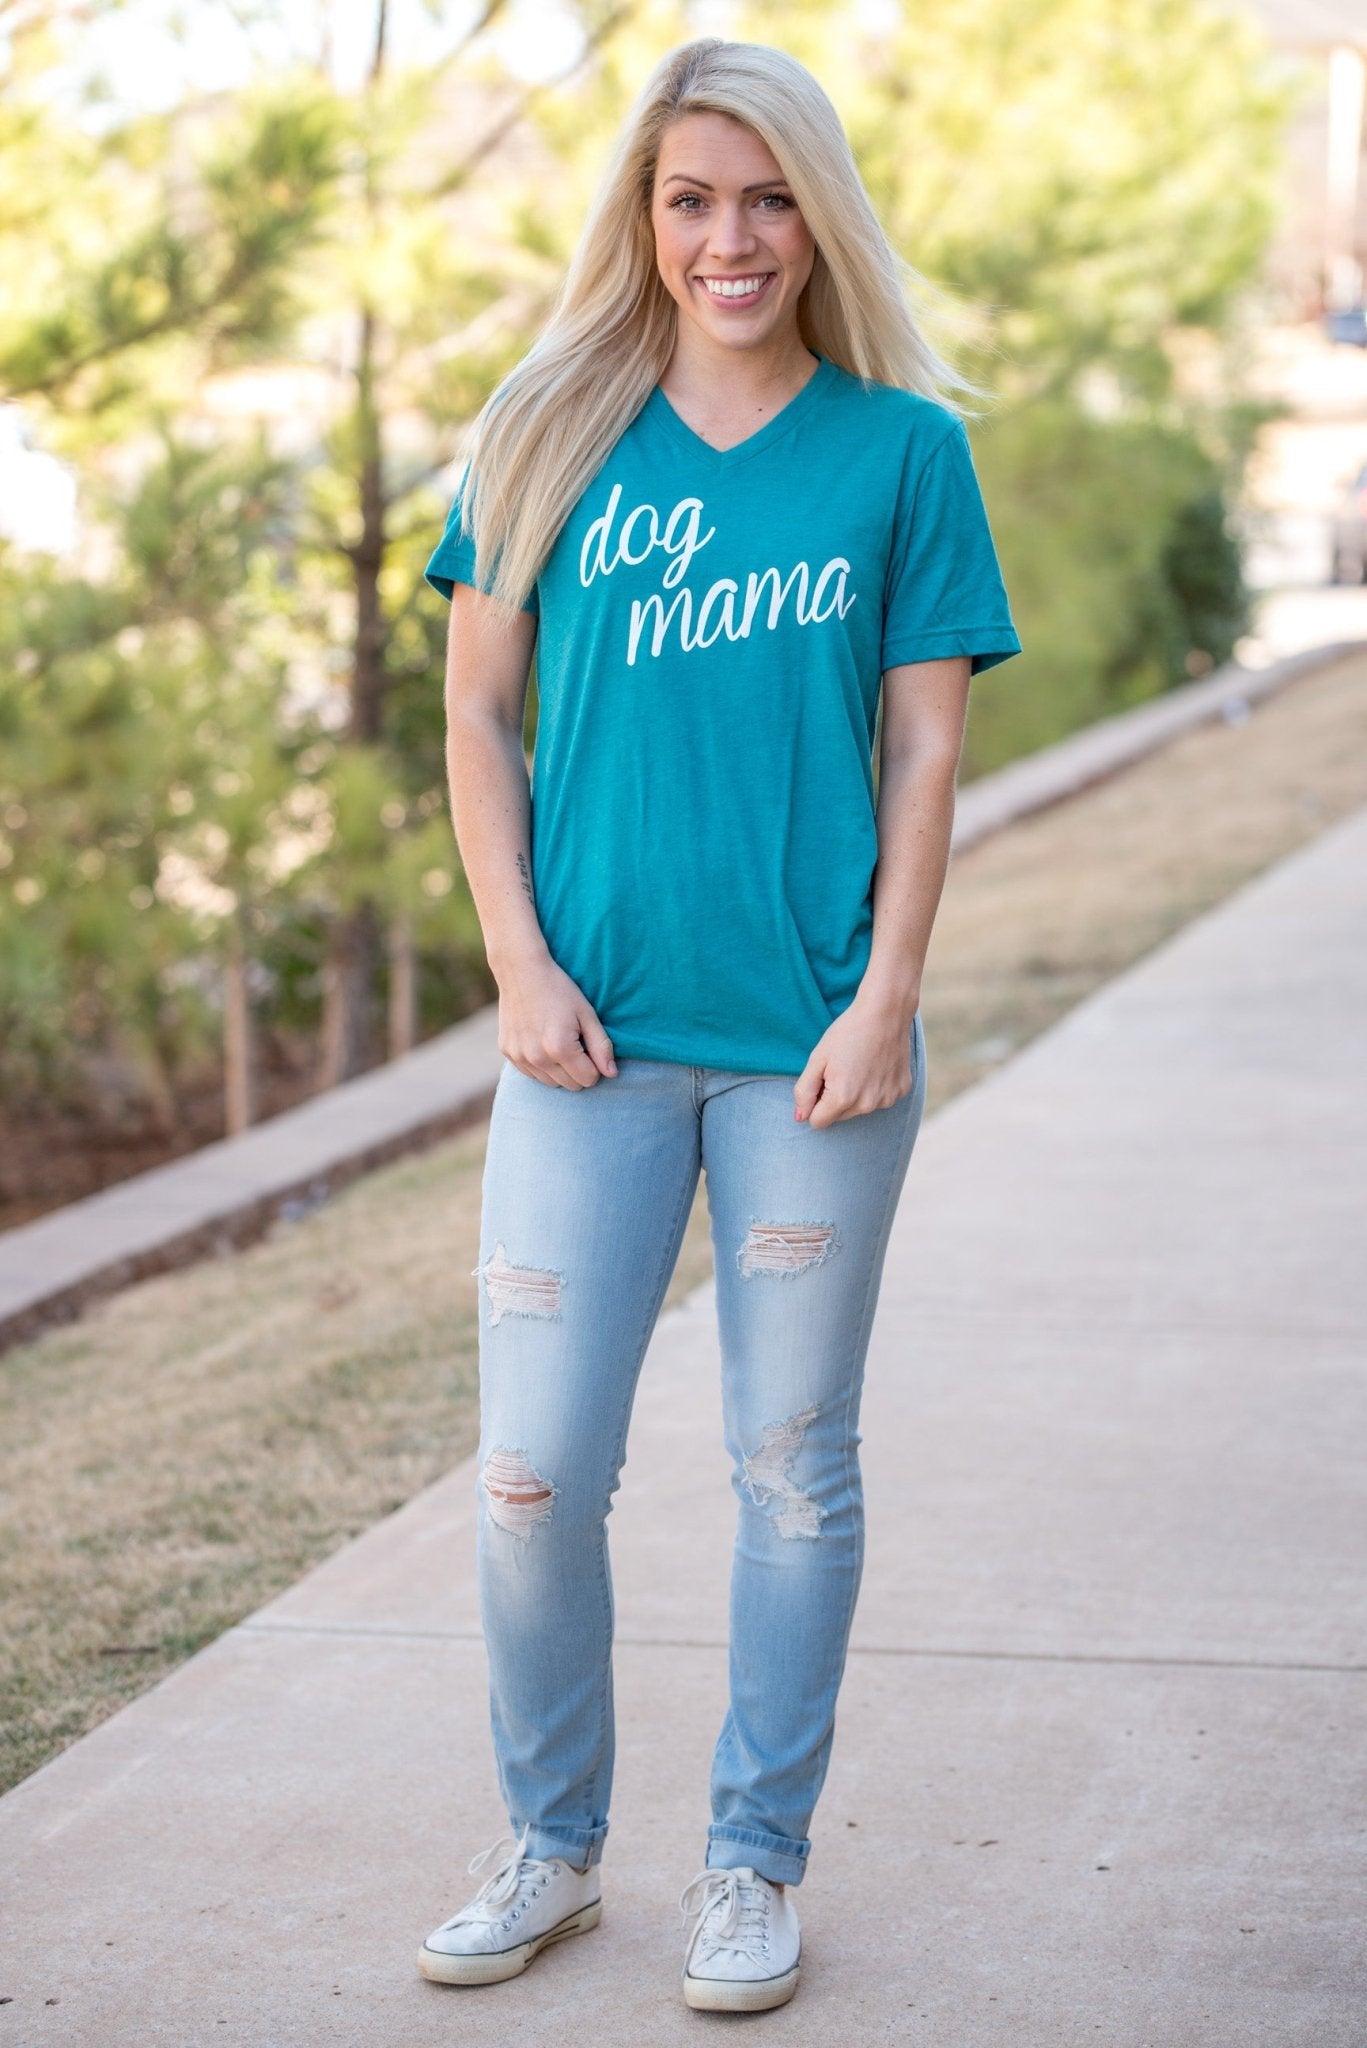 Dog mama script short sleeve v-neck t-shirt teal - Trendy T-shirts - Cute Graphic Tee Fashion at Lush Fashion Lounge Boutique in Oklahoma